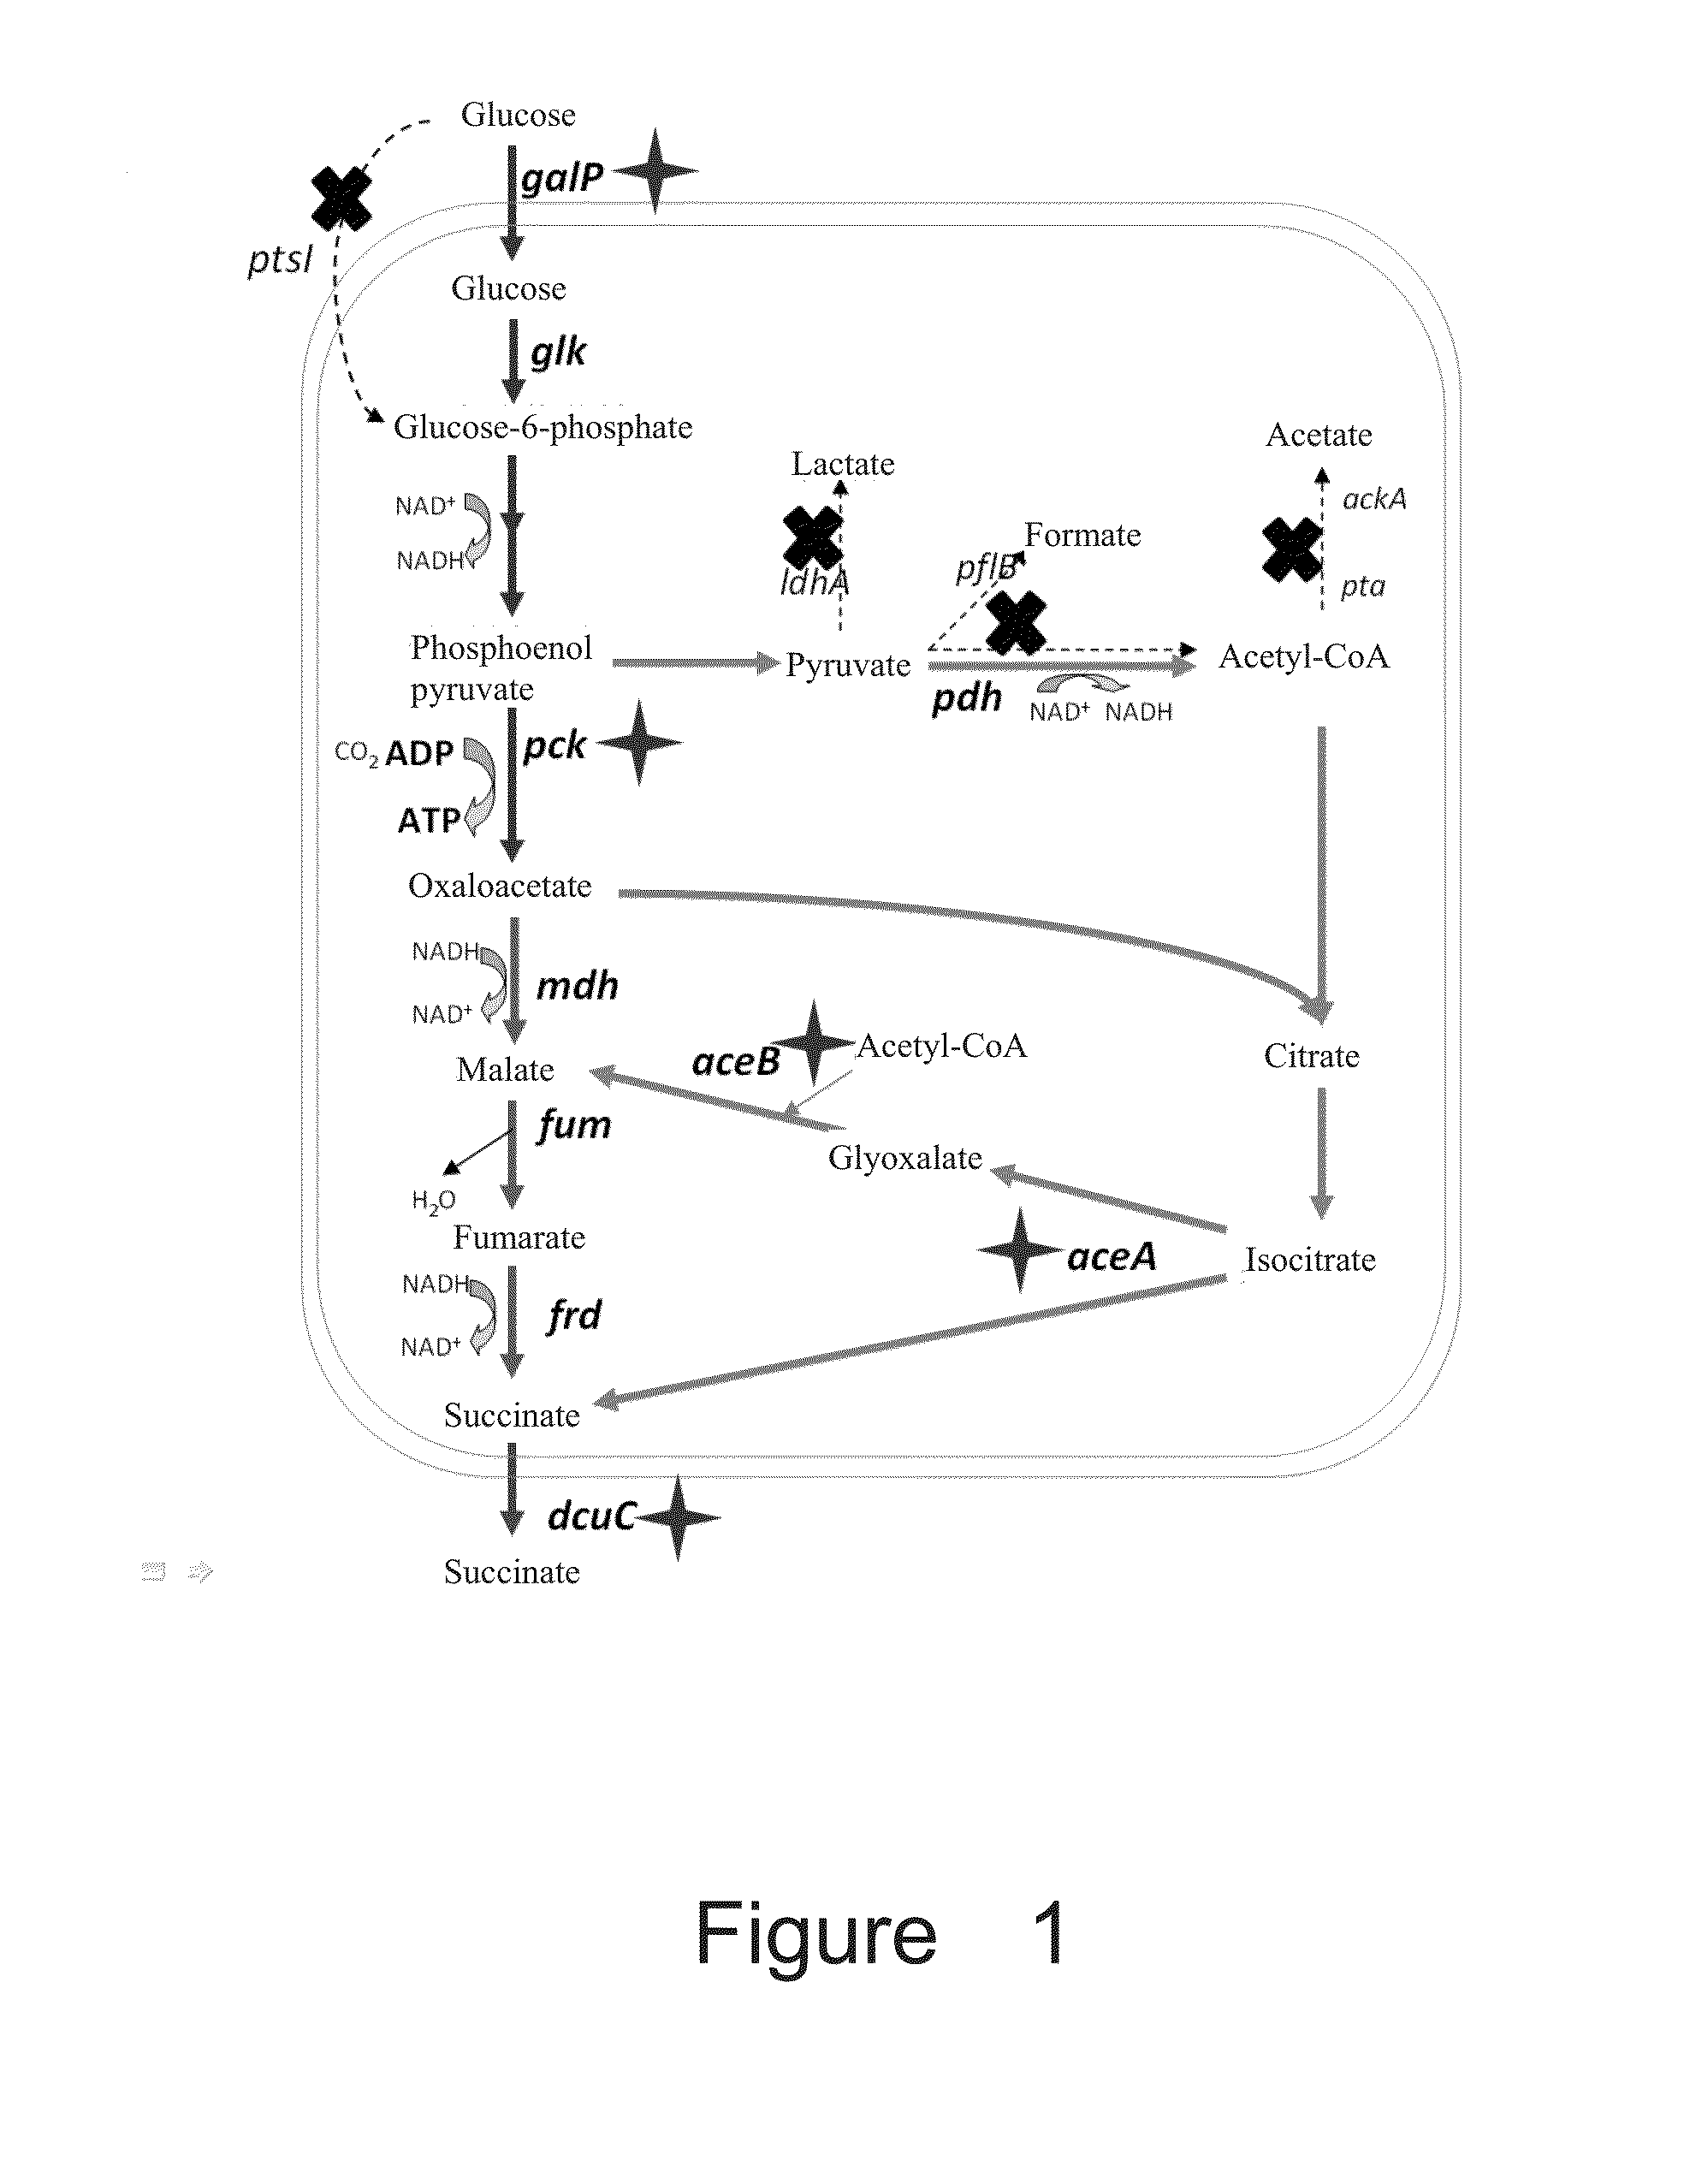 Recombinant escherichia coli for producing succinic acid and application thereof